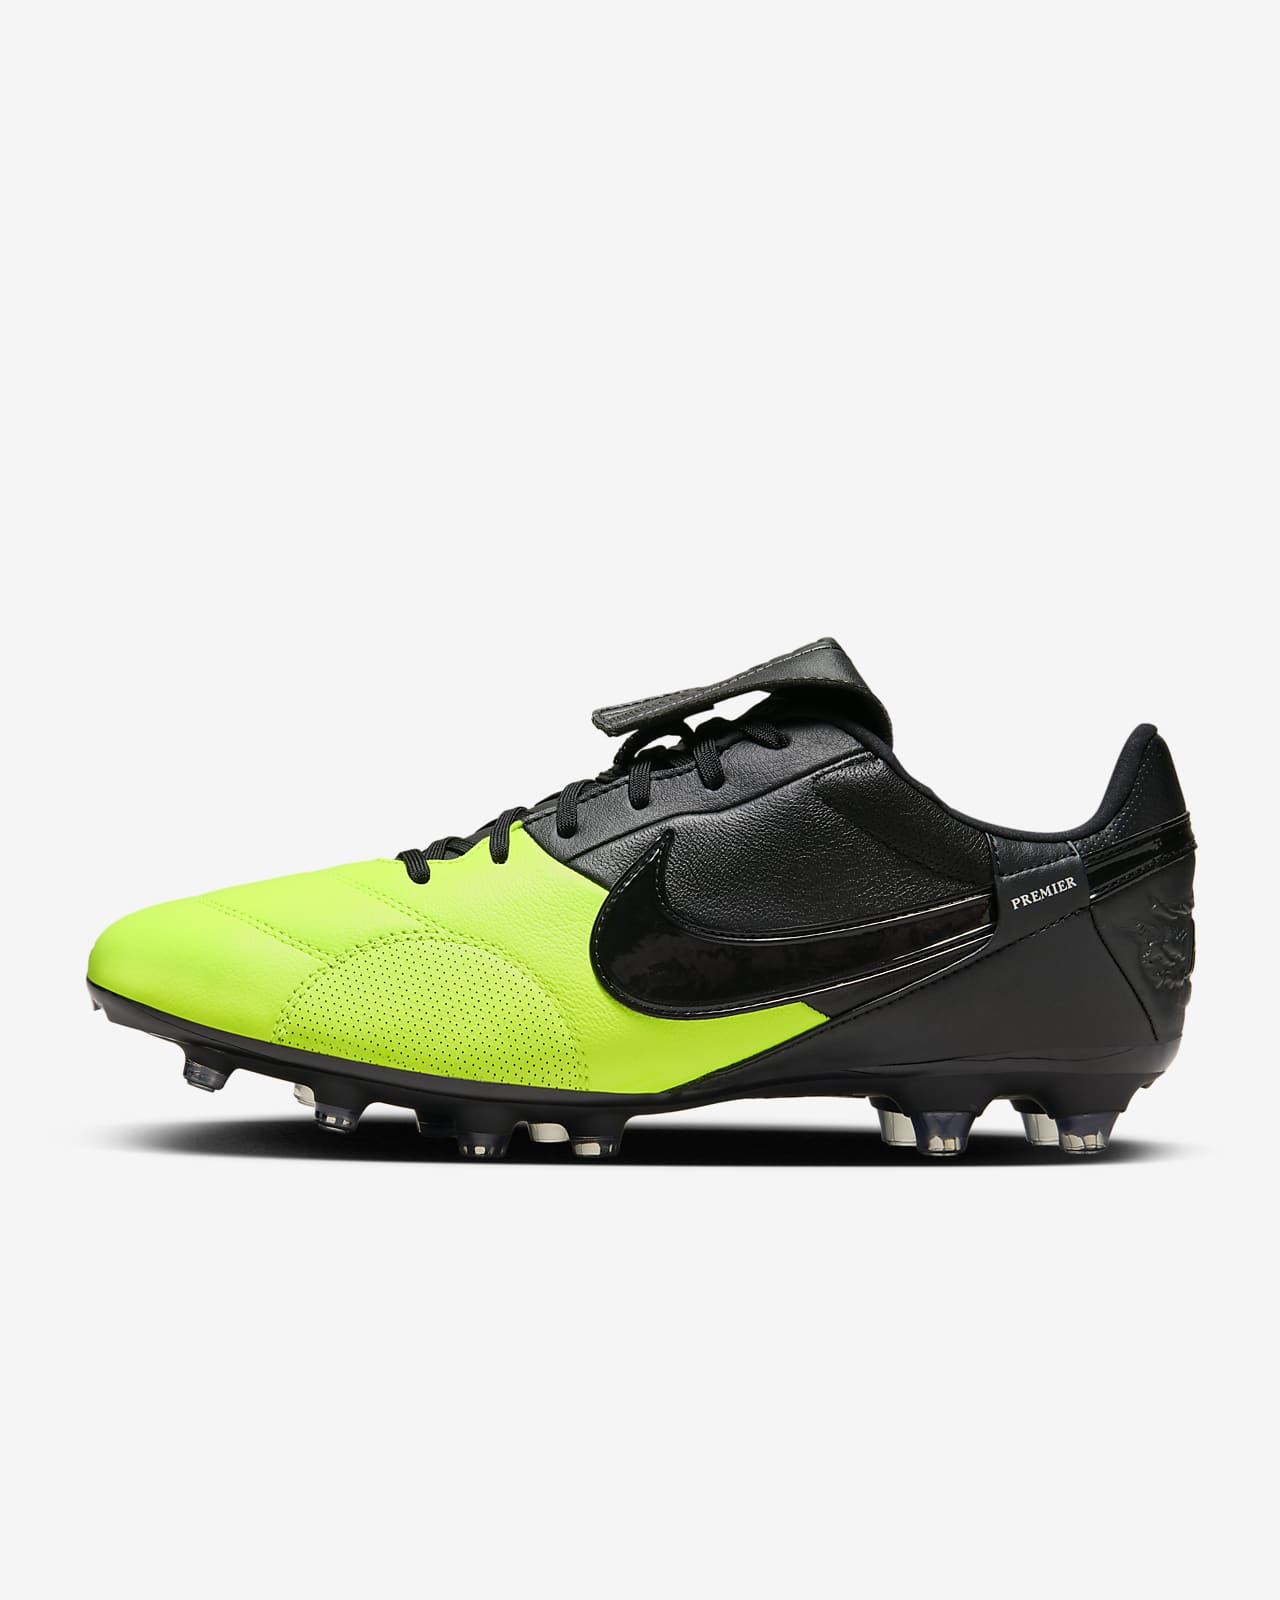 NikePremier 3 Firm-Ground Soccer Cleats